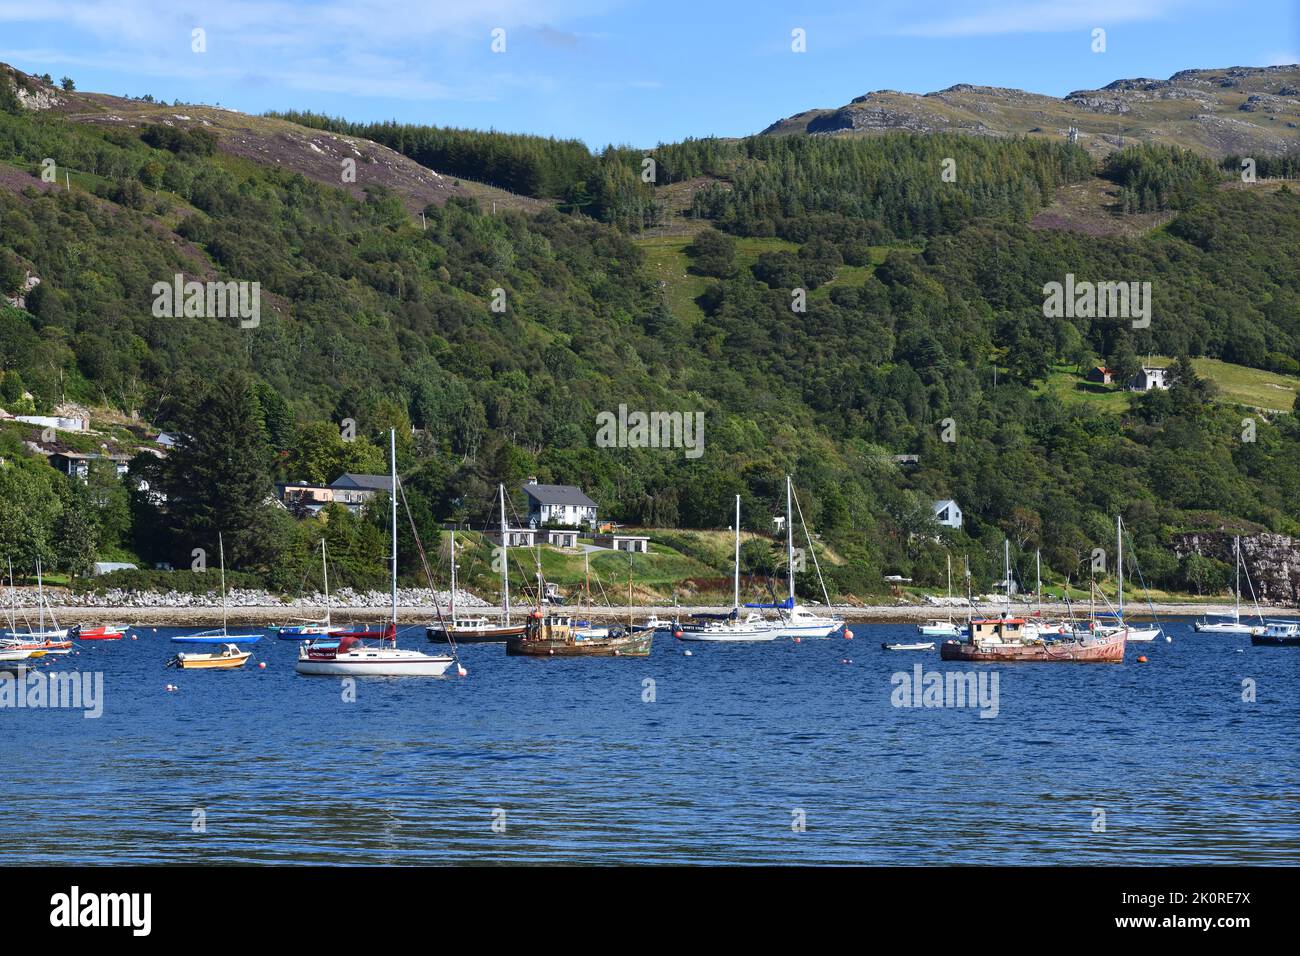 Yachts moored in the bay off Ullapool on Loch Broom, Scotland, UK Stock Photo